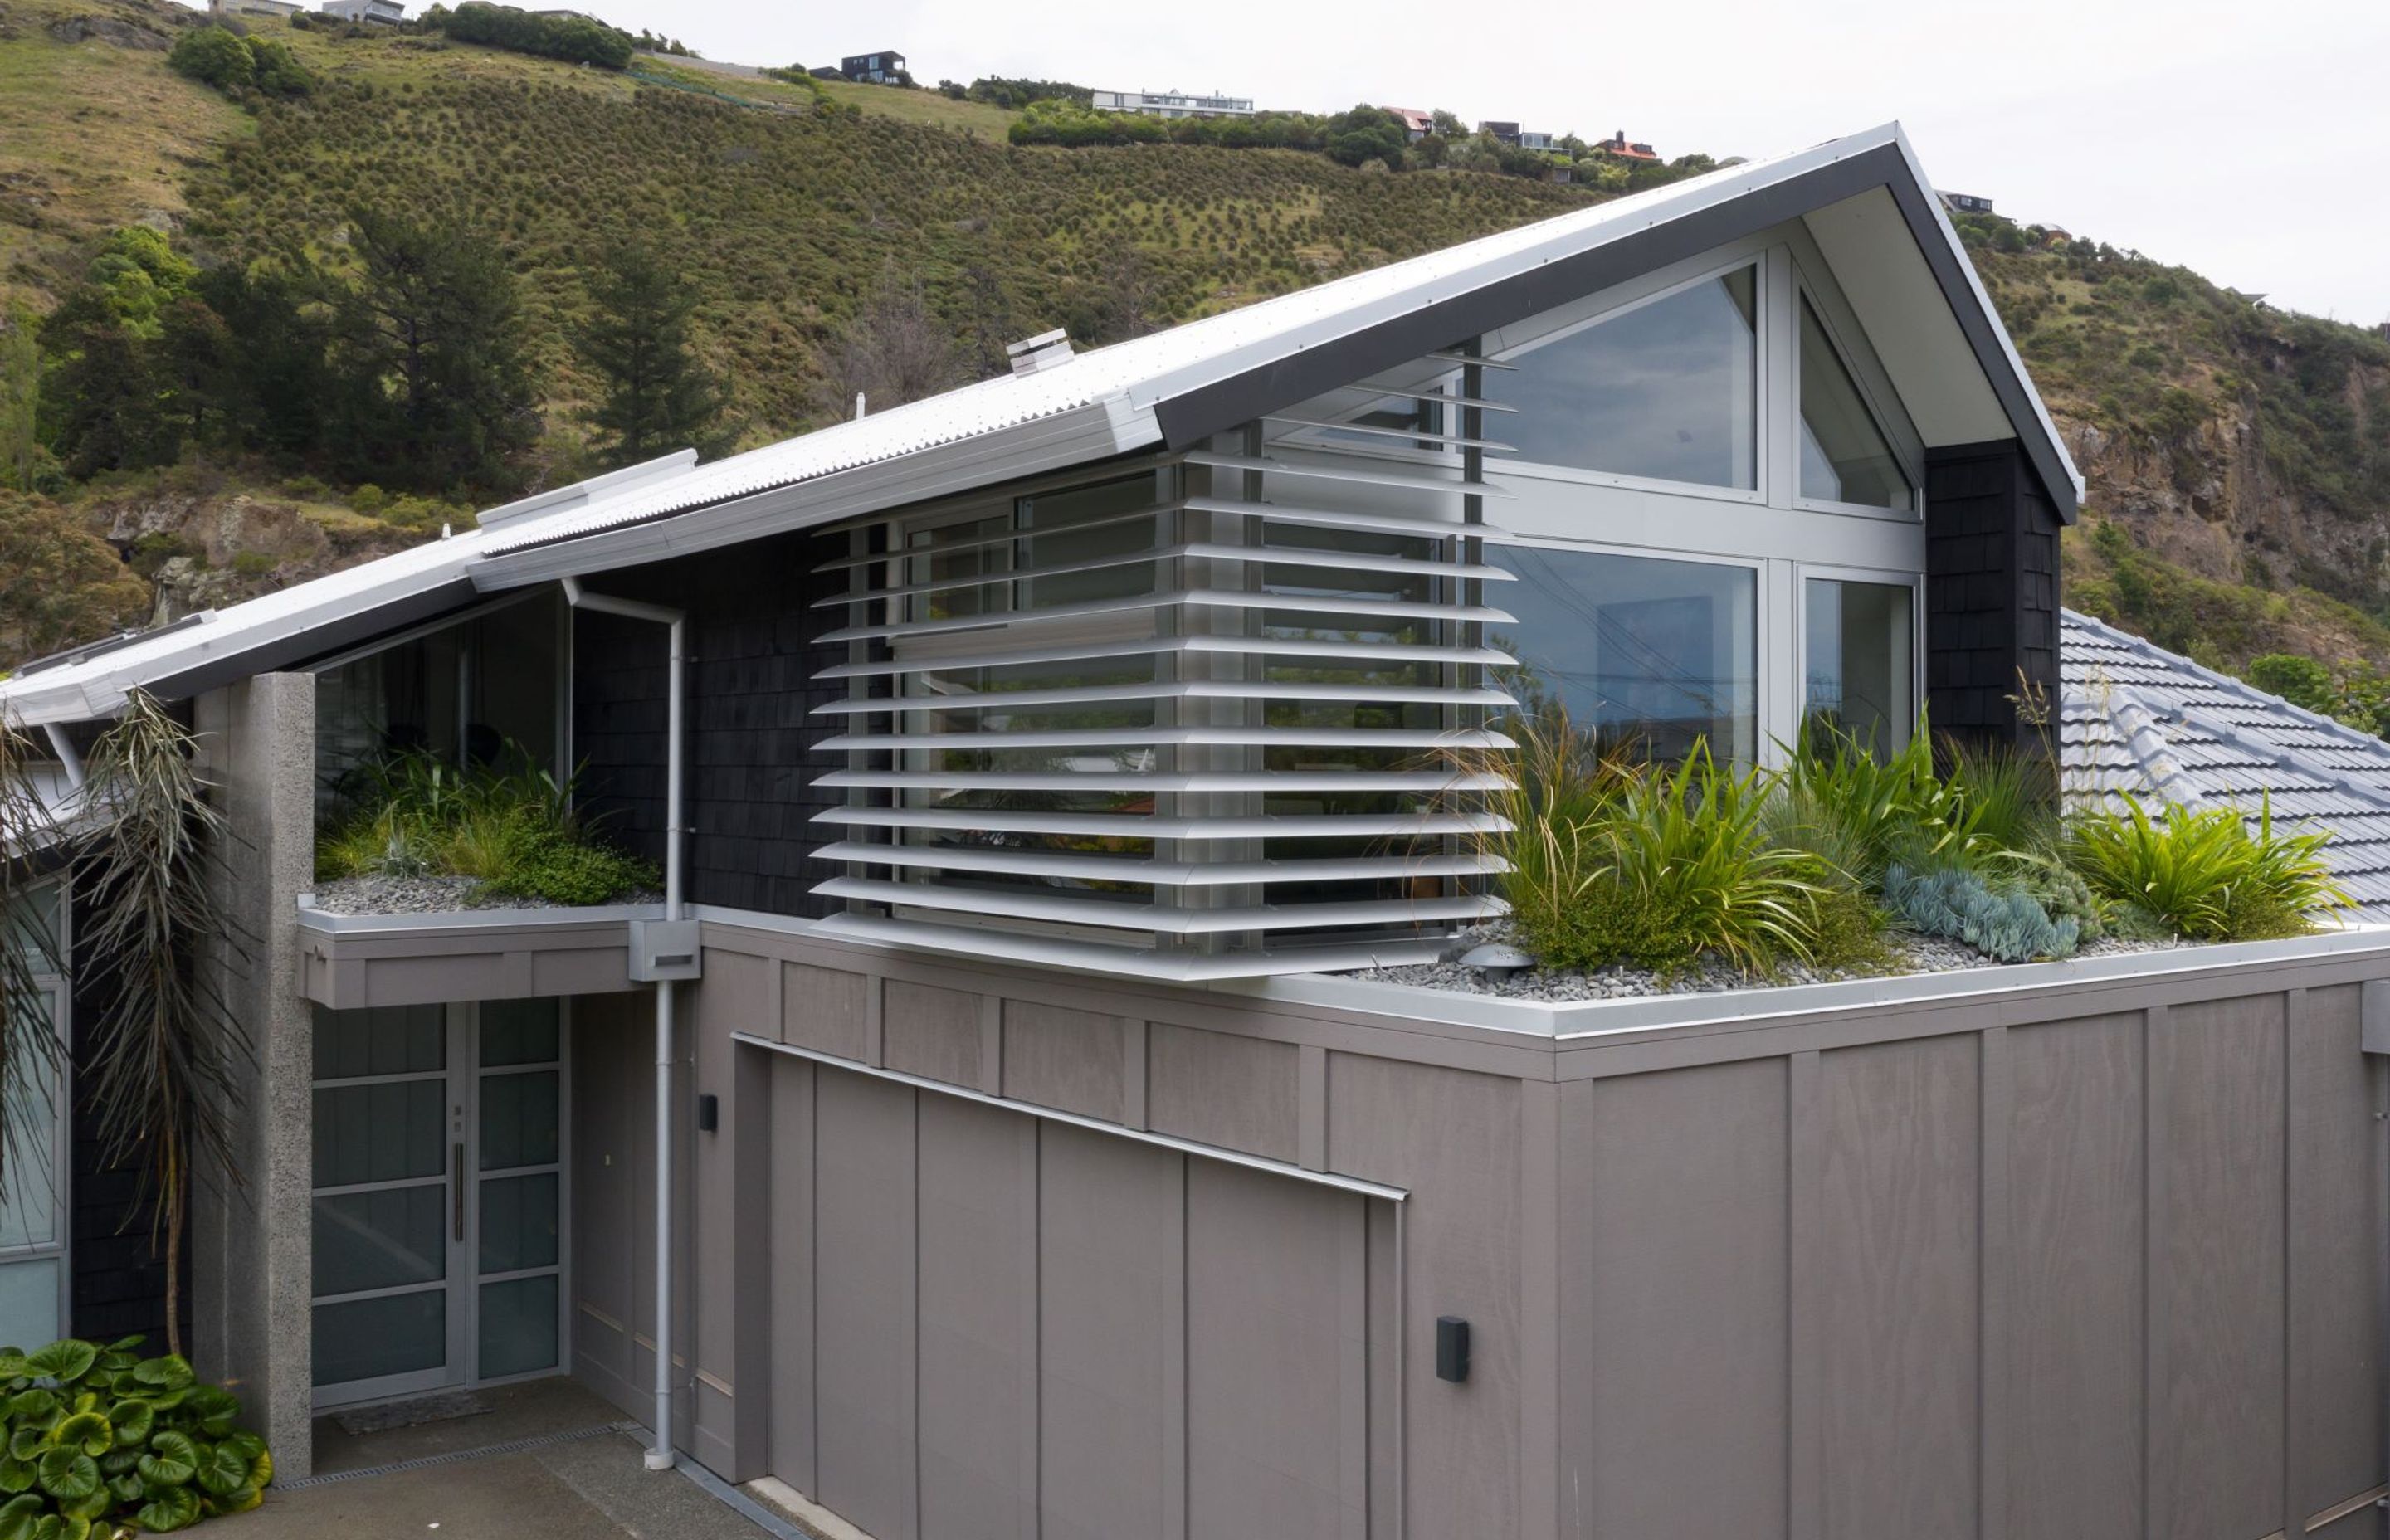 Natural Habitats transformed multiple sections of this Christchurch home's roof with 115 plants spanning across 13 species.